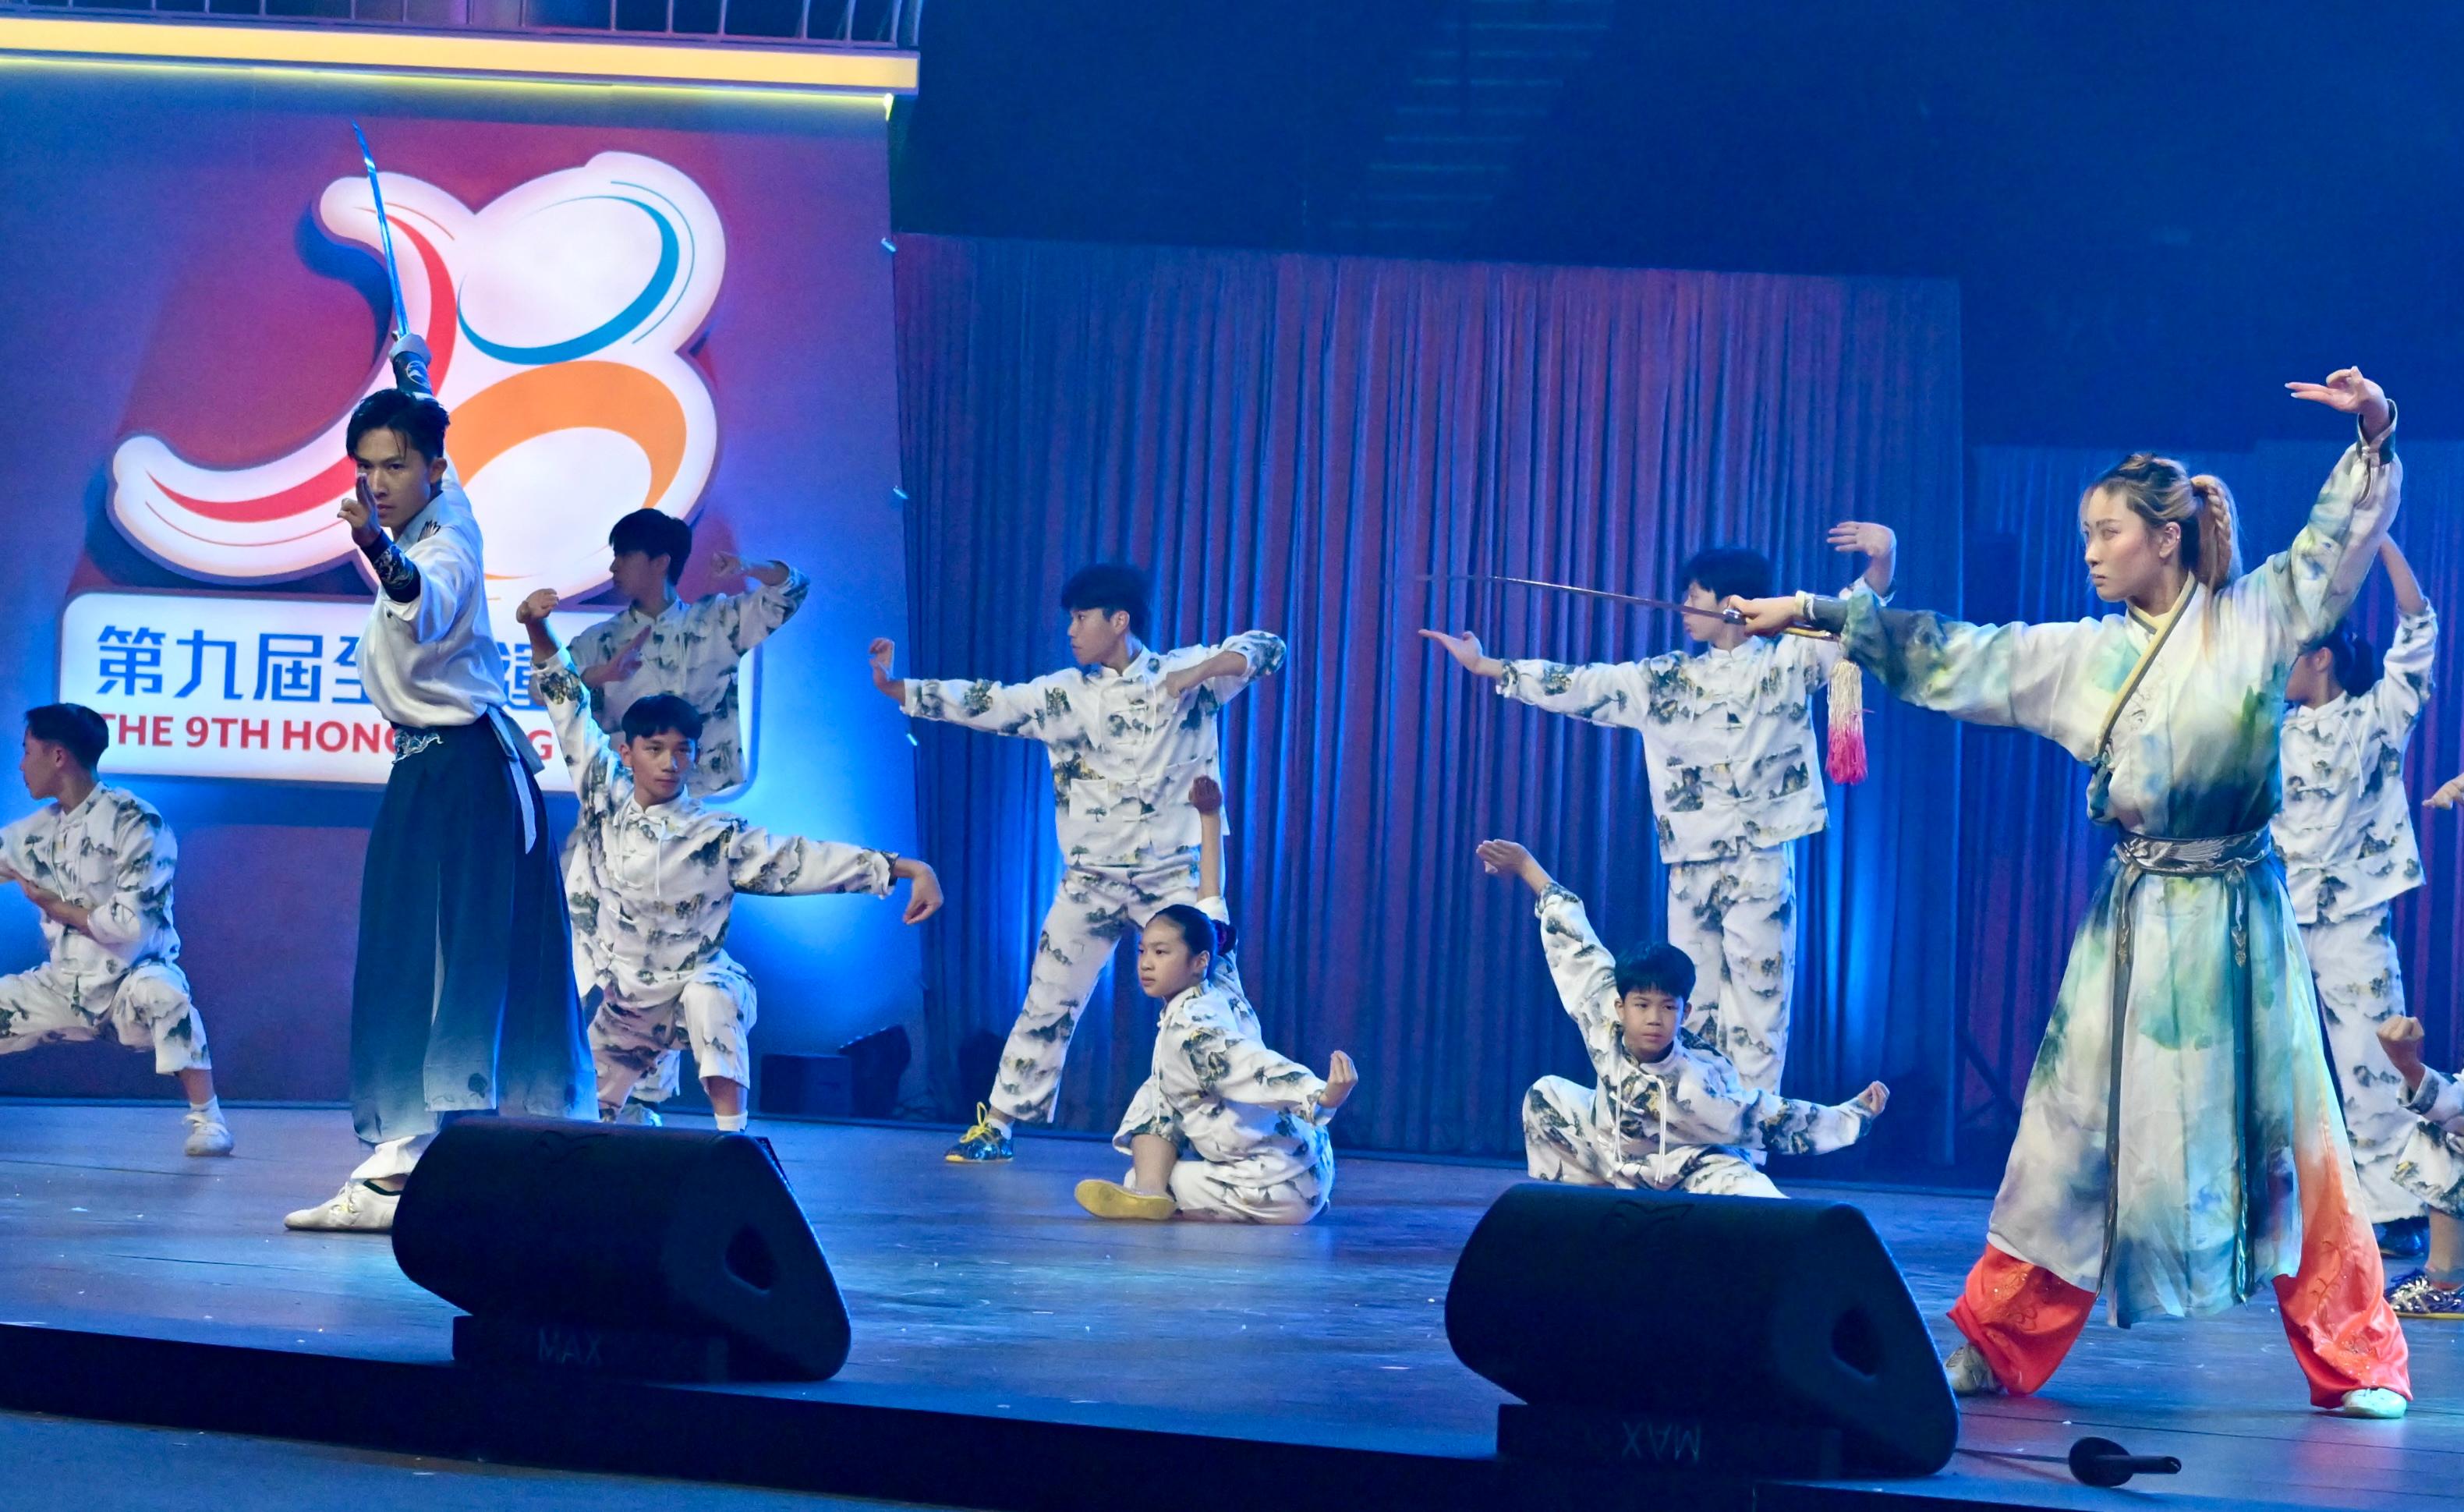 The 9th Hong Kong Games Opening Ceremony was held at the Hong Kong Coliseum today (April 21). Photo shows Hong Kong medallists Samuel Hui (second left) and Lydia Sham (first right) performing various wushu styles to audience.